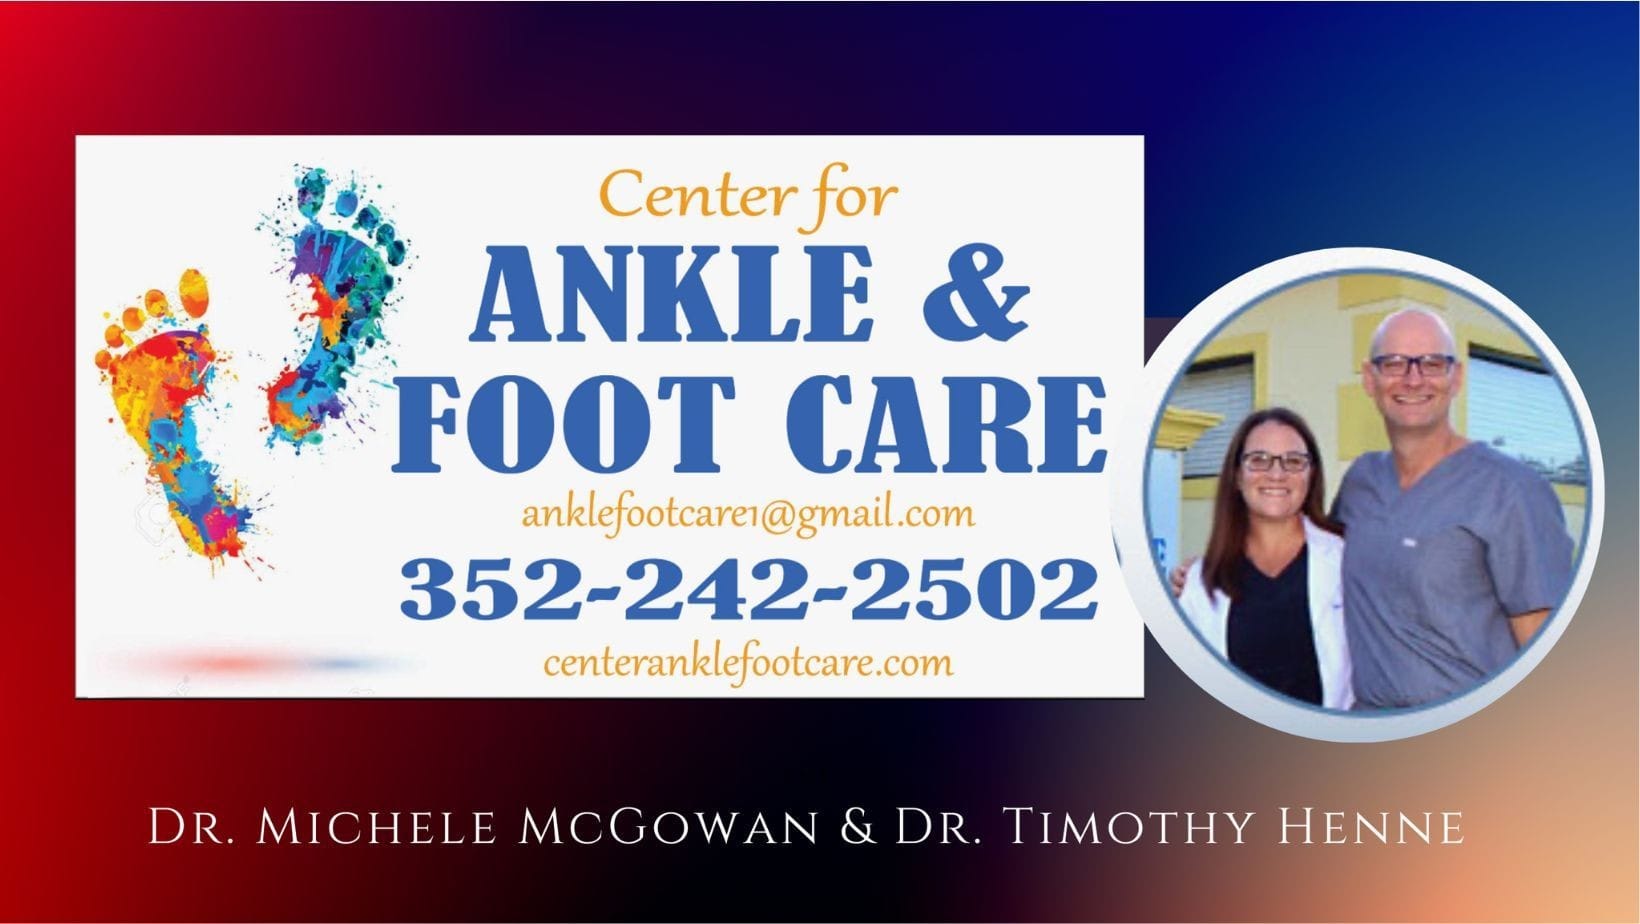 What we treat at the Center for Ankle and Foot Care